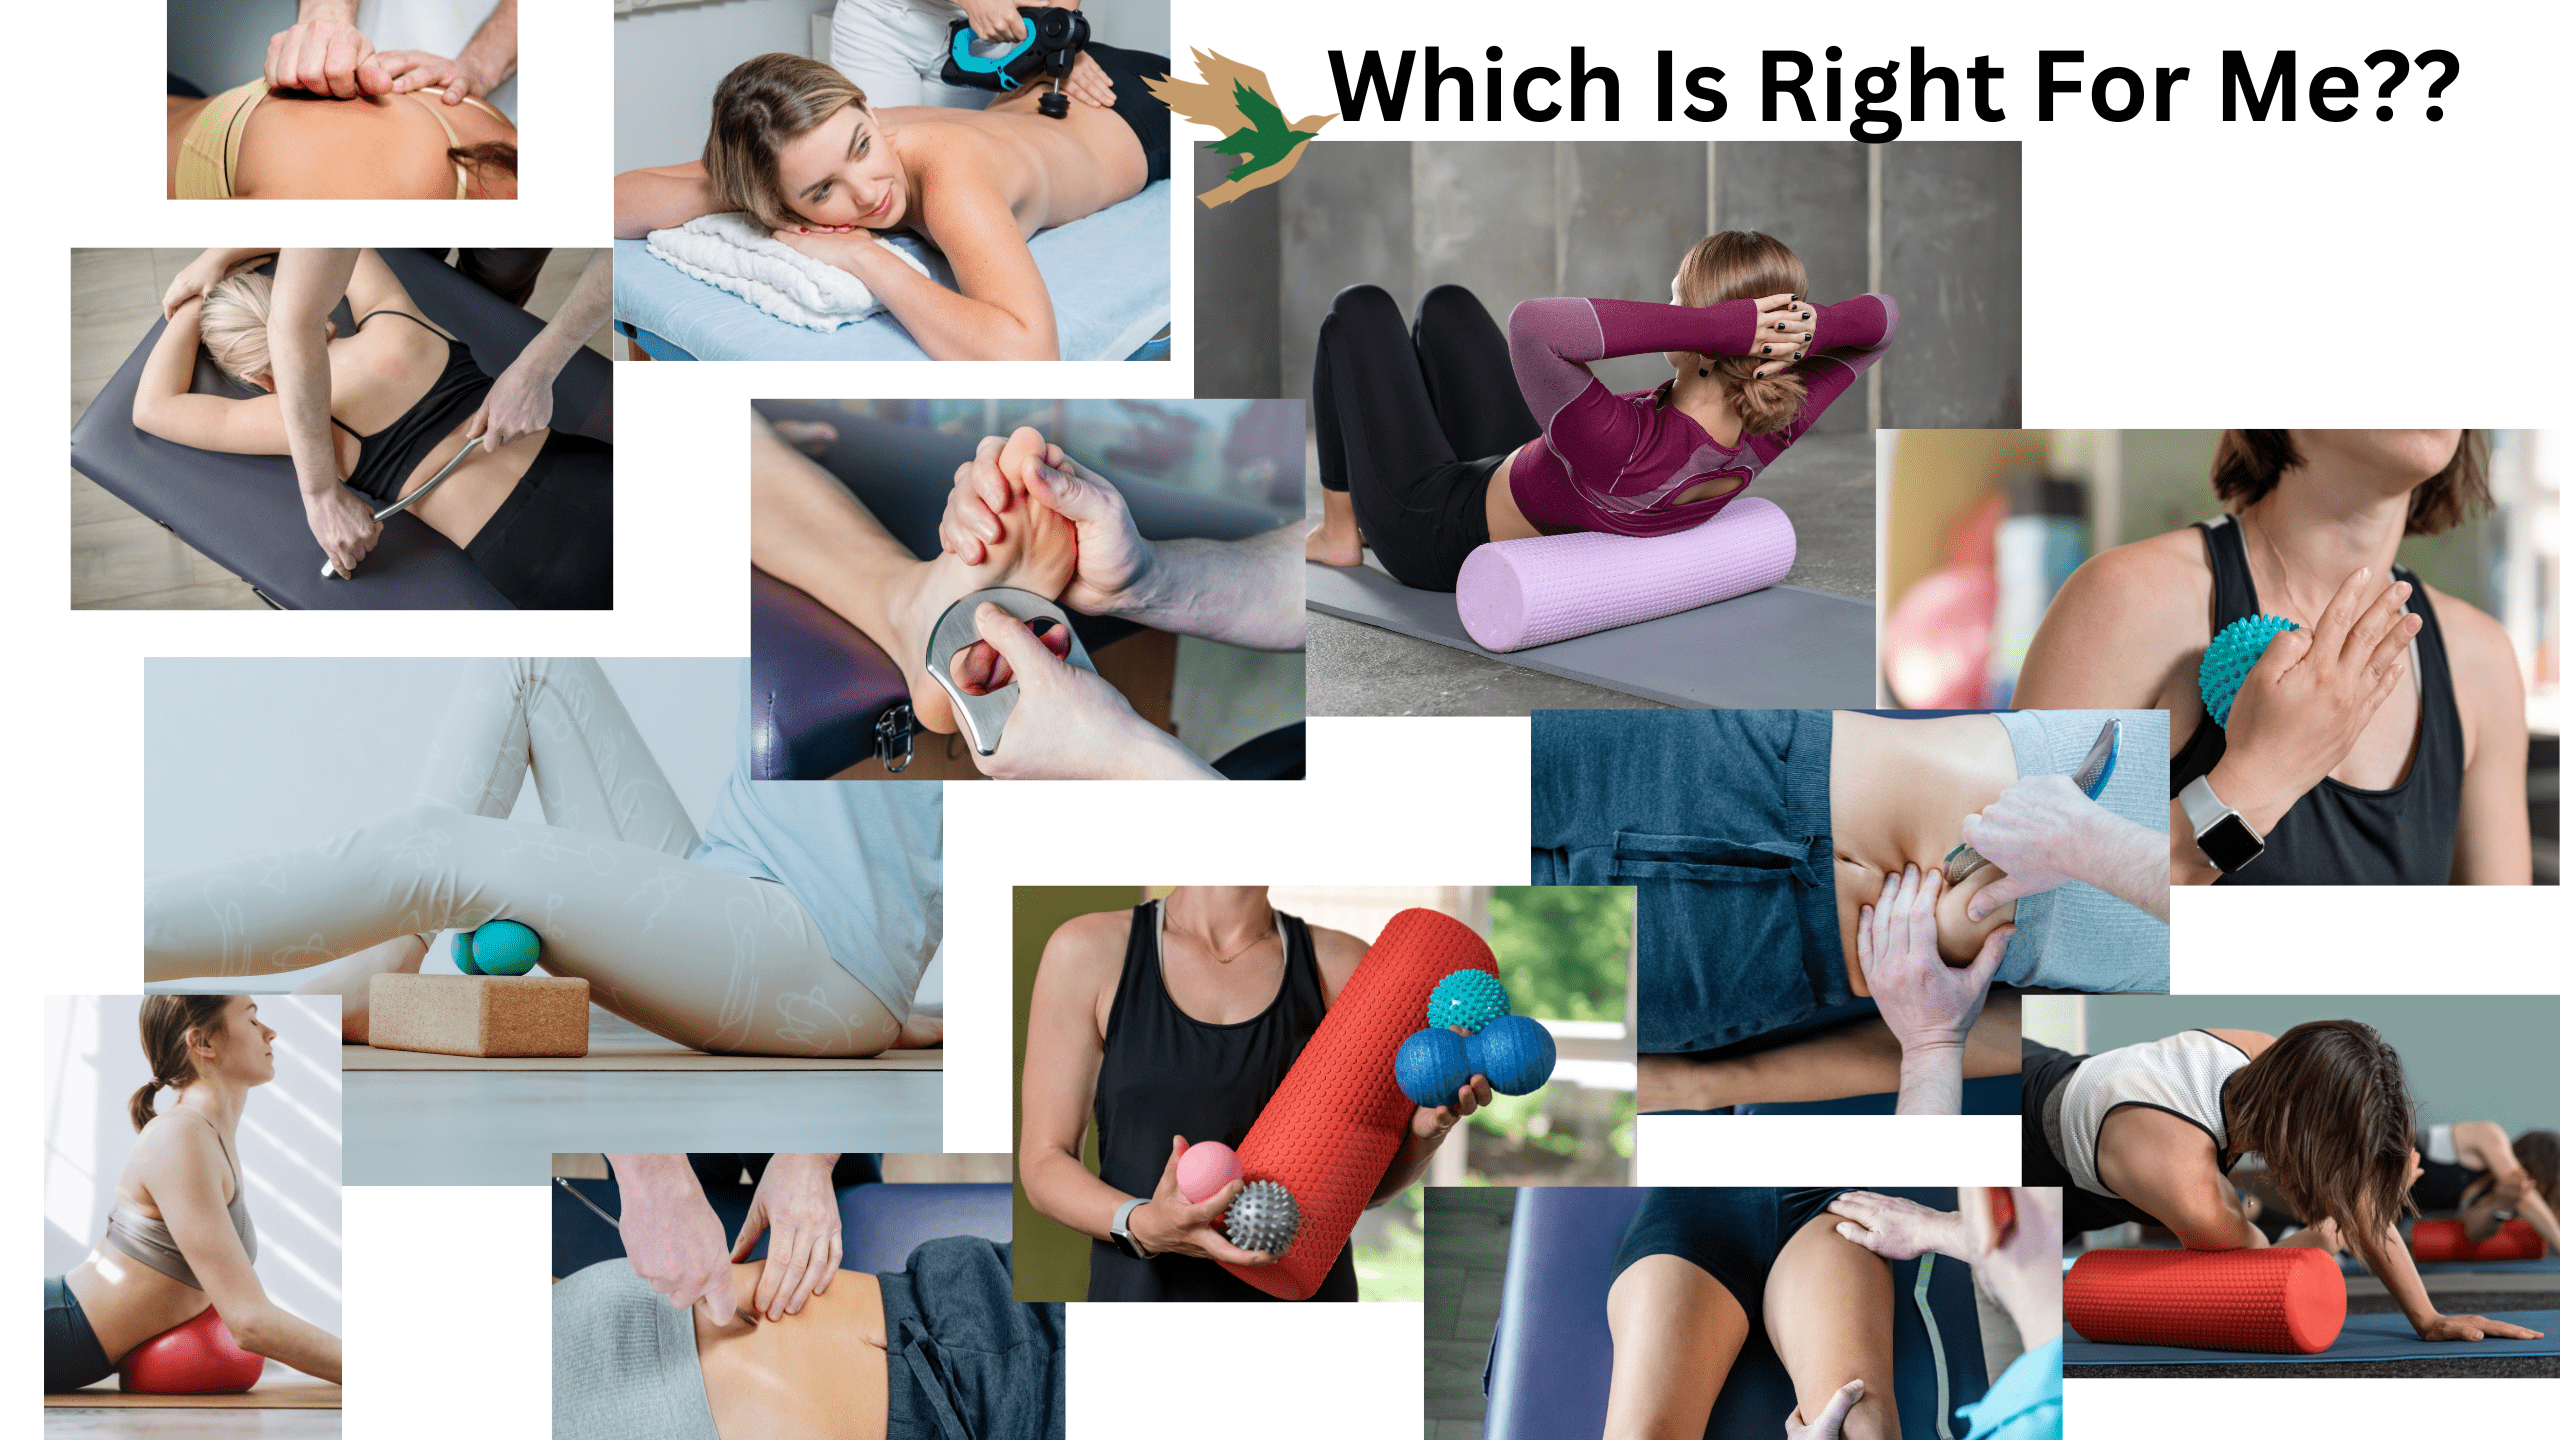 Which form of myofascial release is right for me?